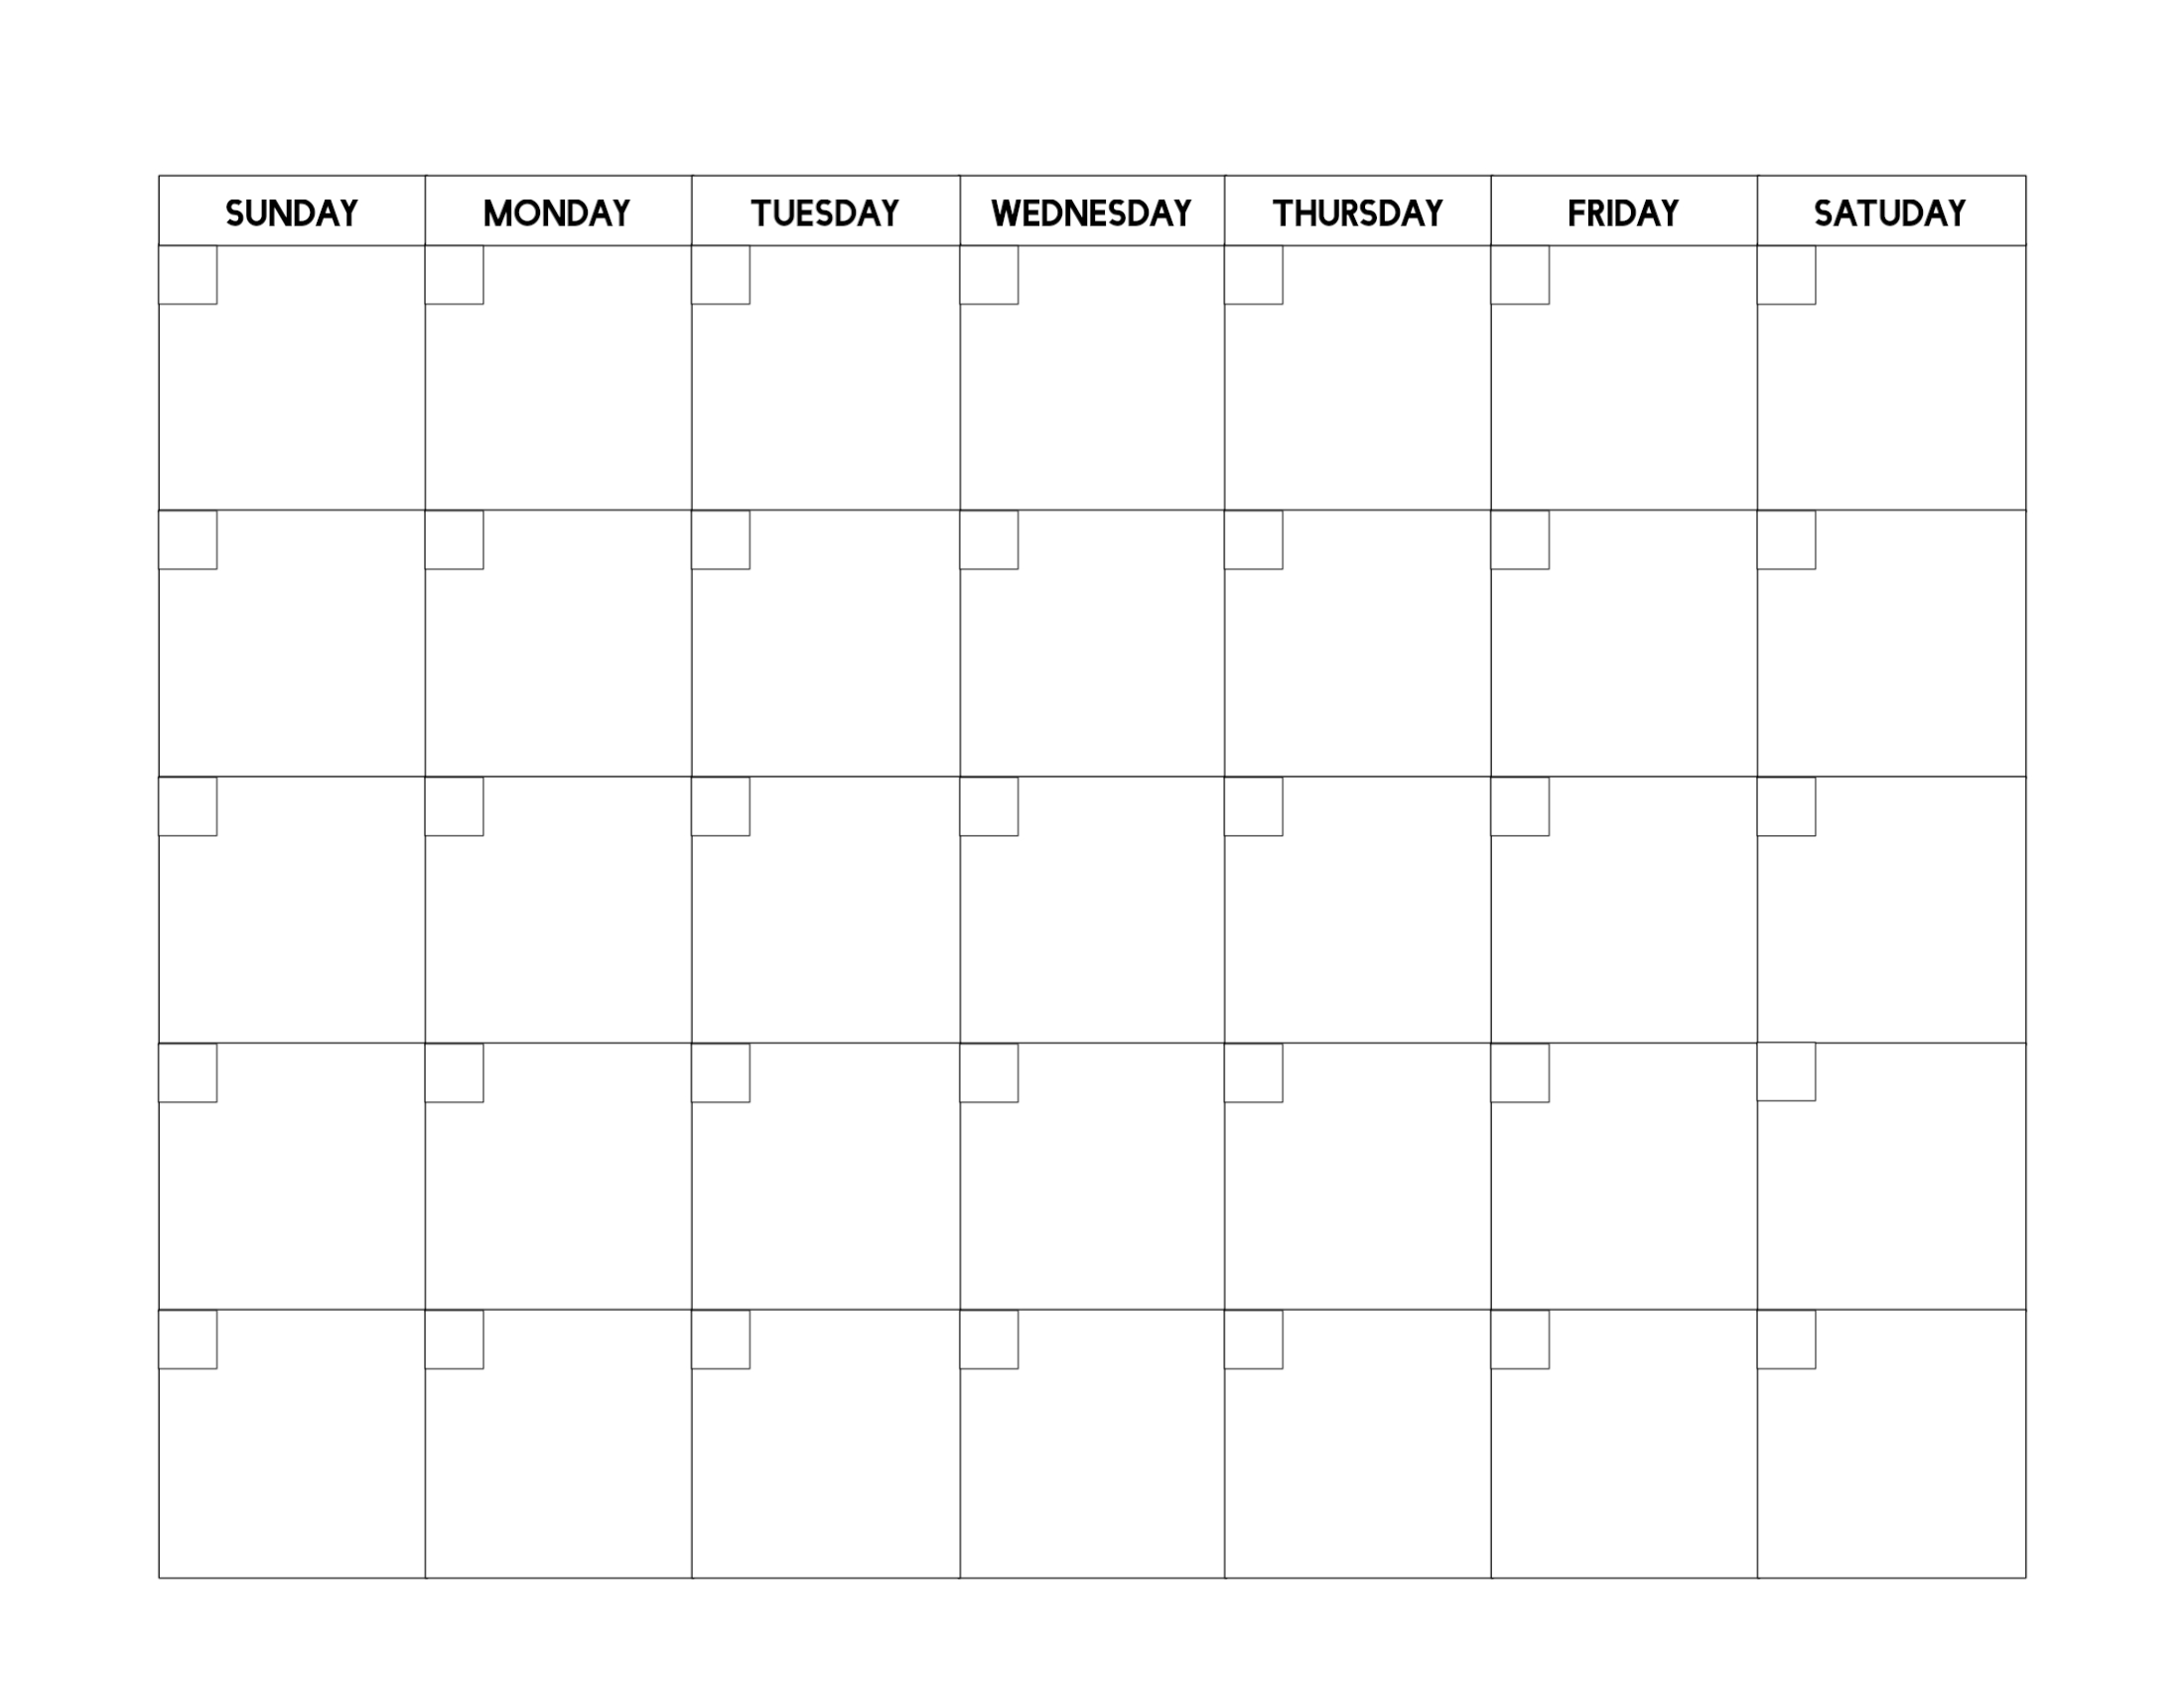 Free Printable Blank Calendar Template – Paper Trail Design Throughout Full Page Blank Calendar Template